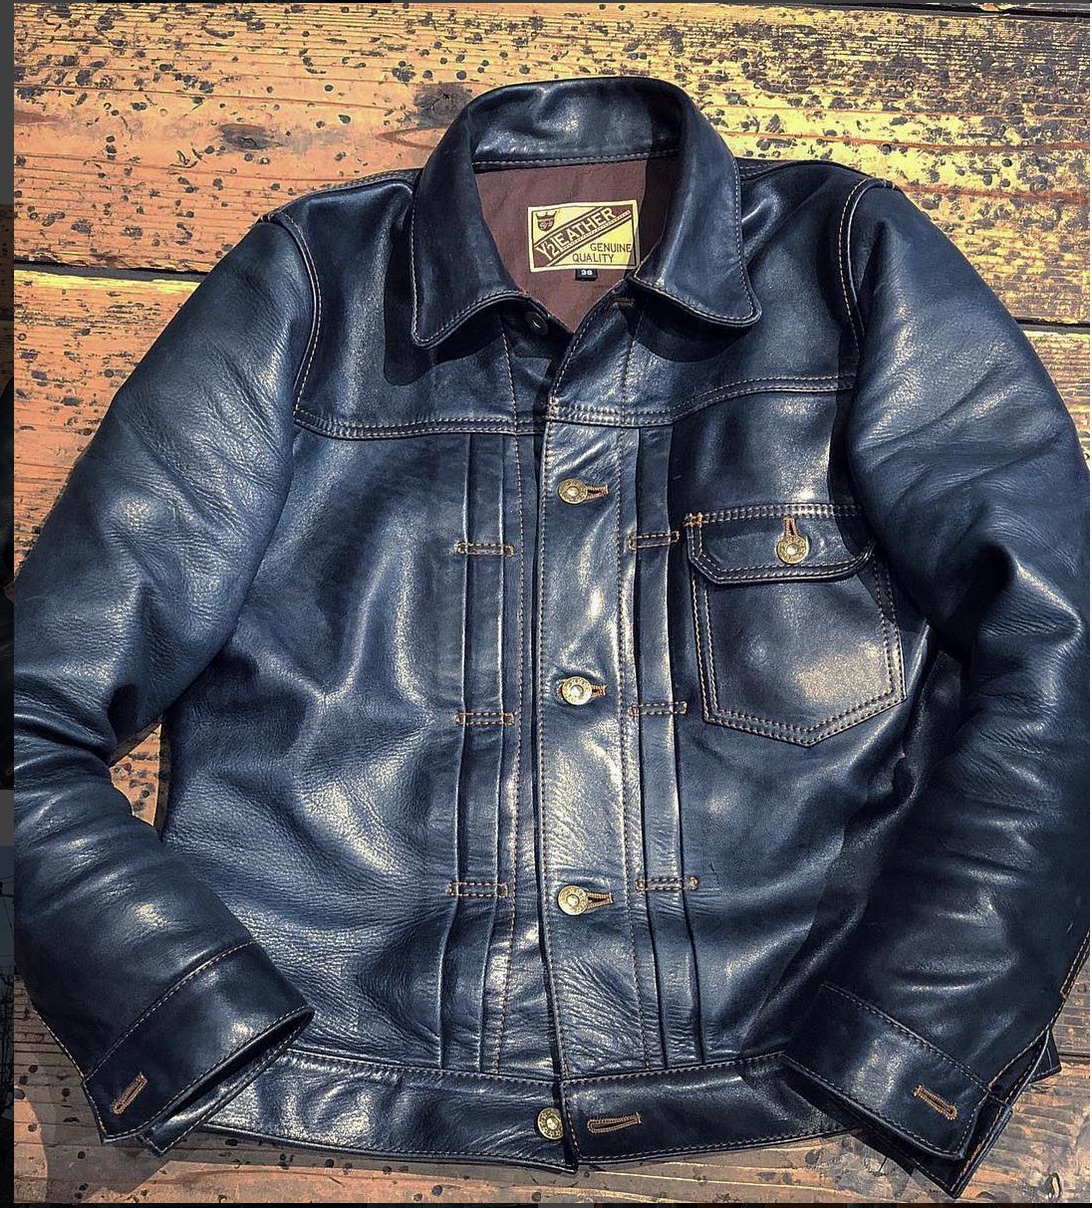 Leather Trucker Levi's / Lee / Type-whatever jackets! | Page 15 | The ...